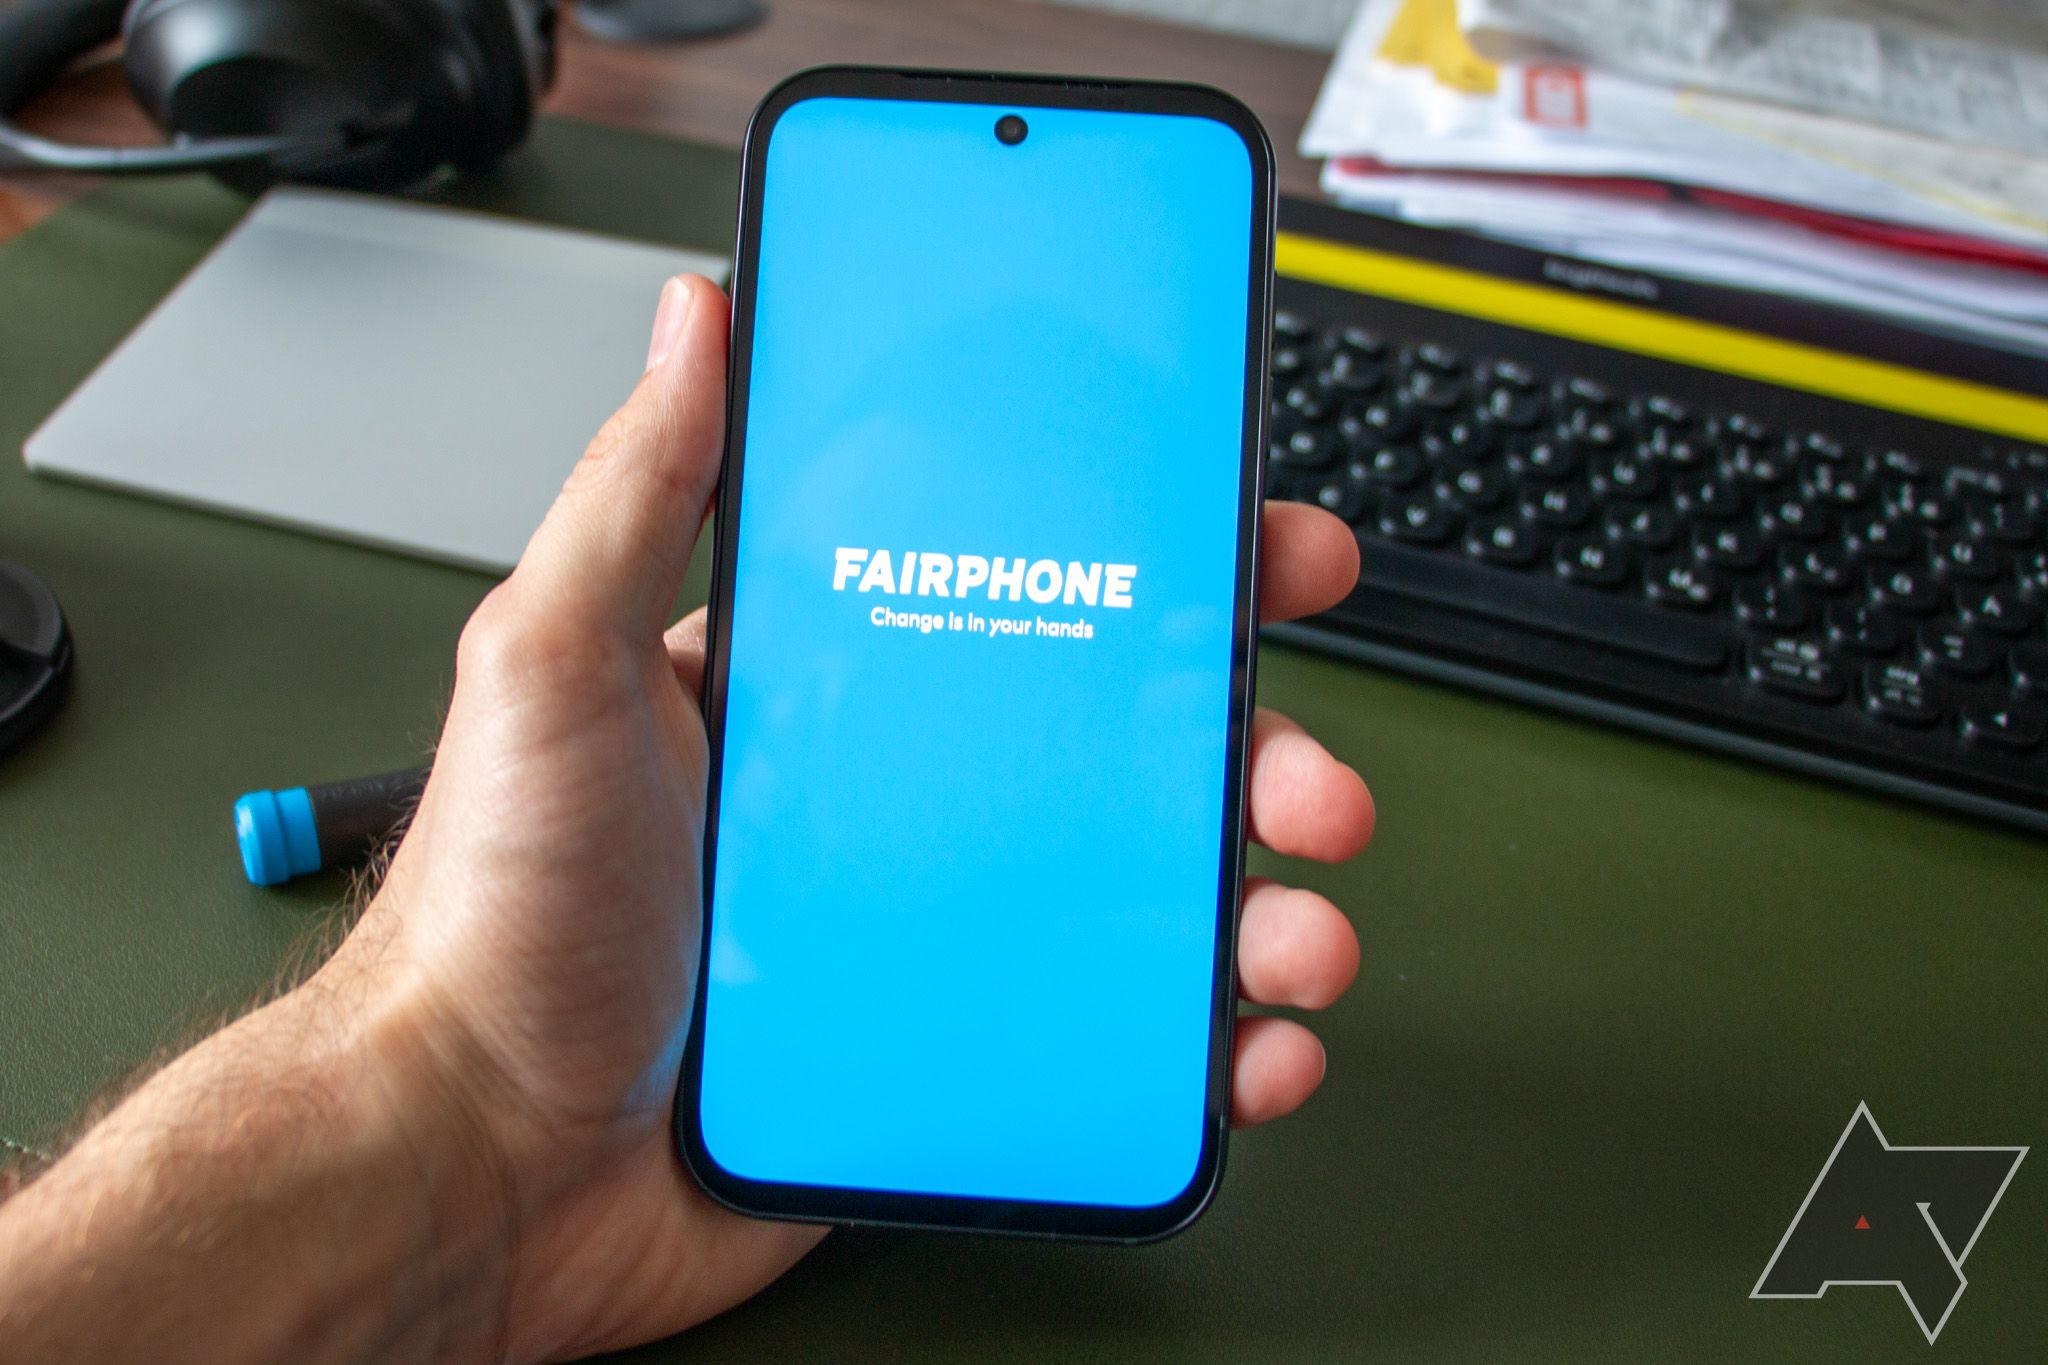 Fairphone 5 with sustainable design, 5 years warranty announced